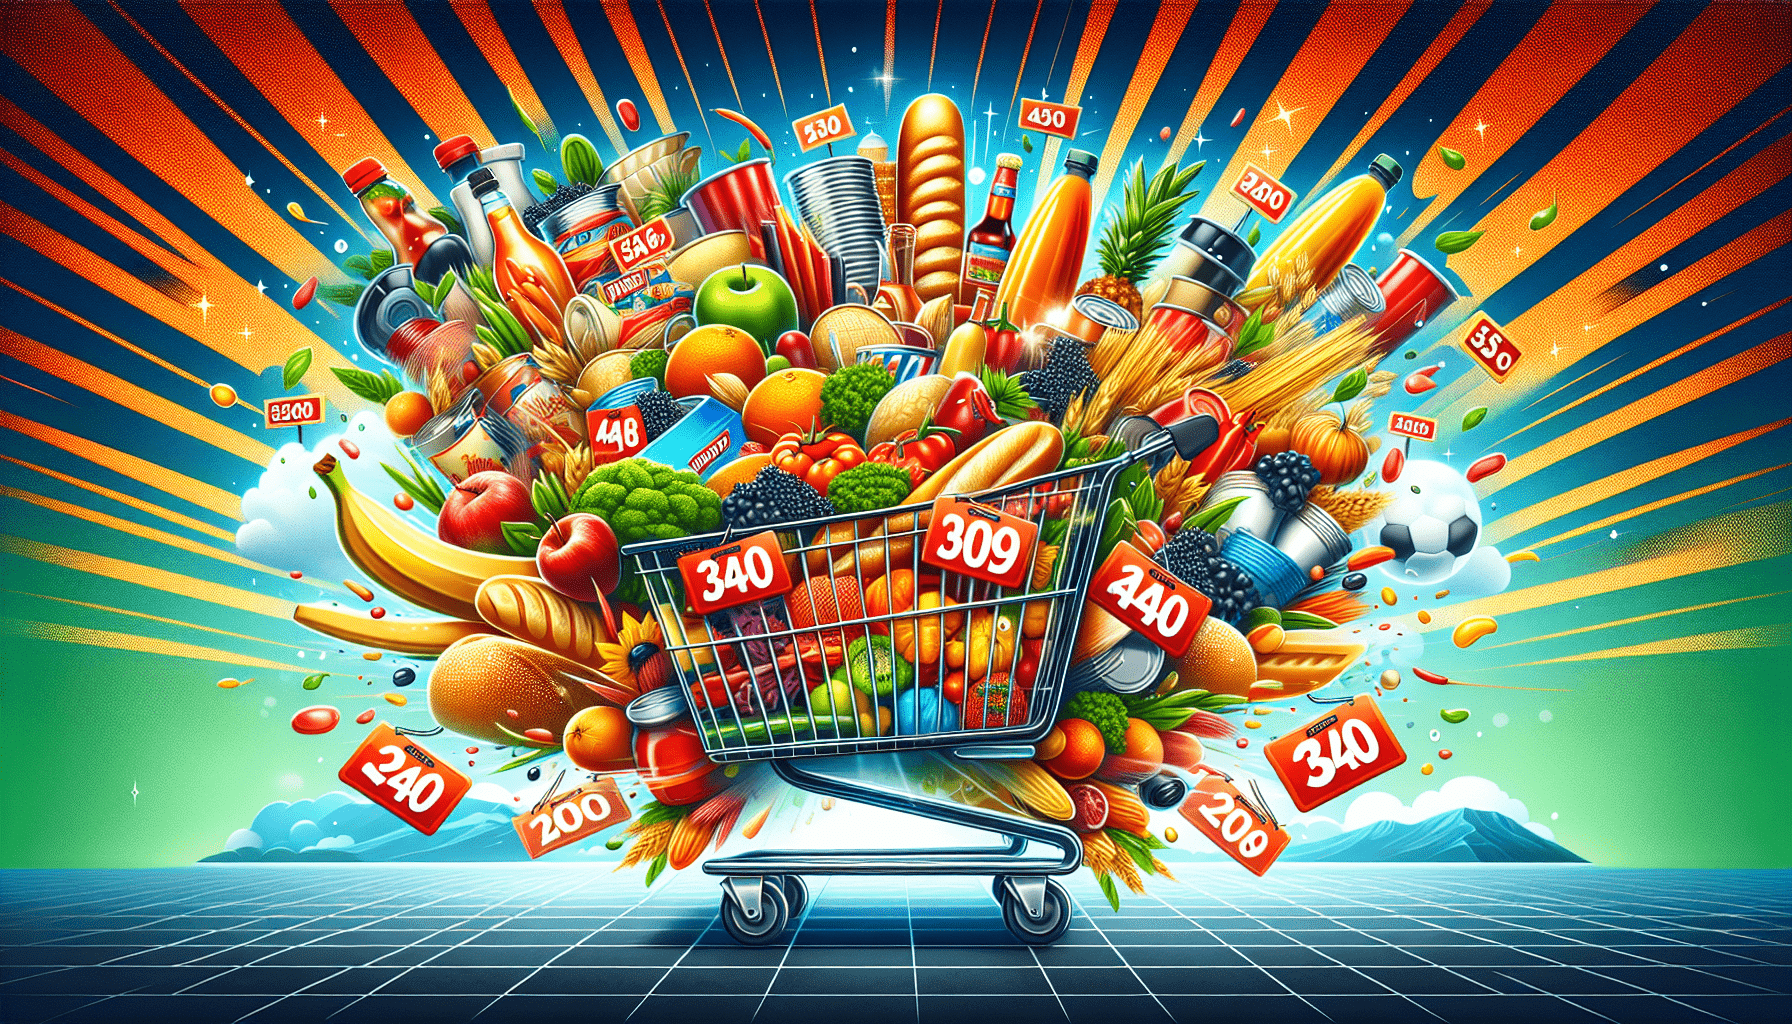 Navigating Discount Stores For The Best Grocery Savings Deals